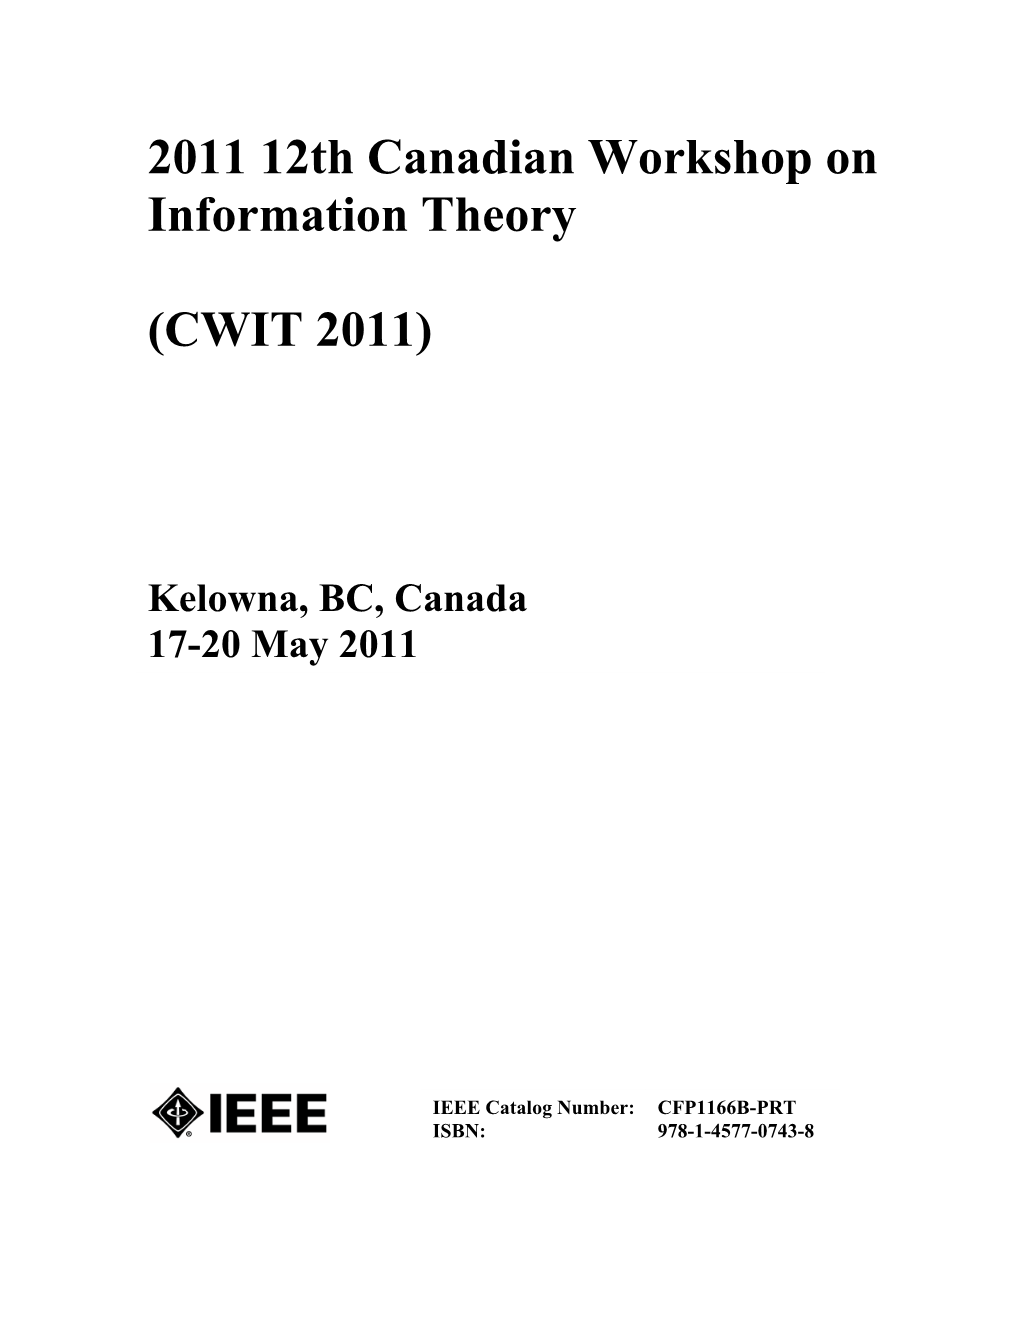 2011 12Th Canadian Workshop on Information Theory